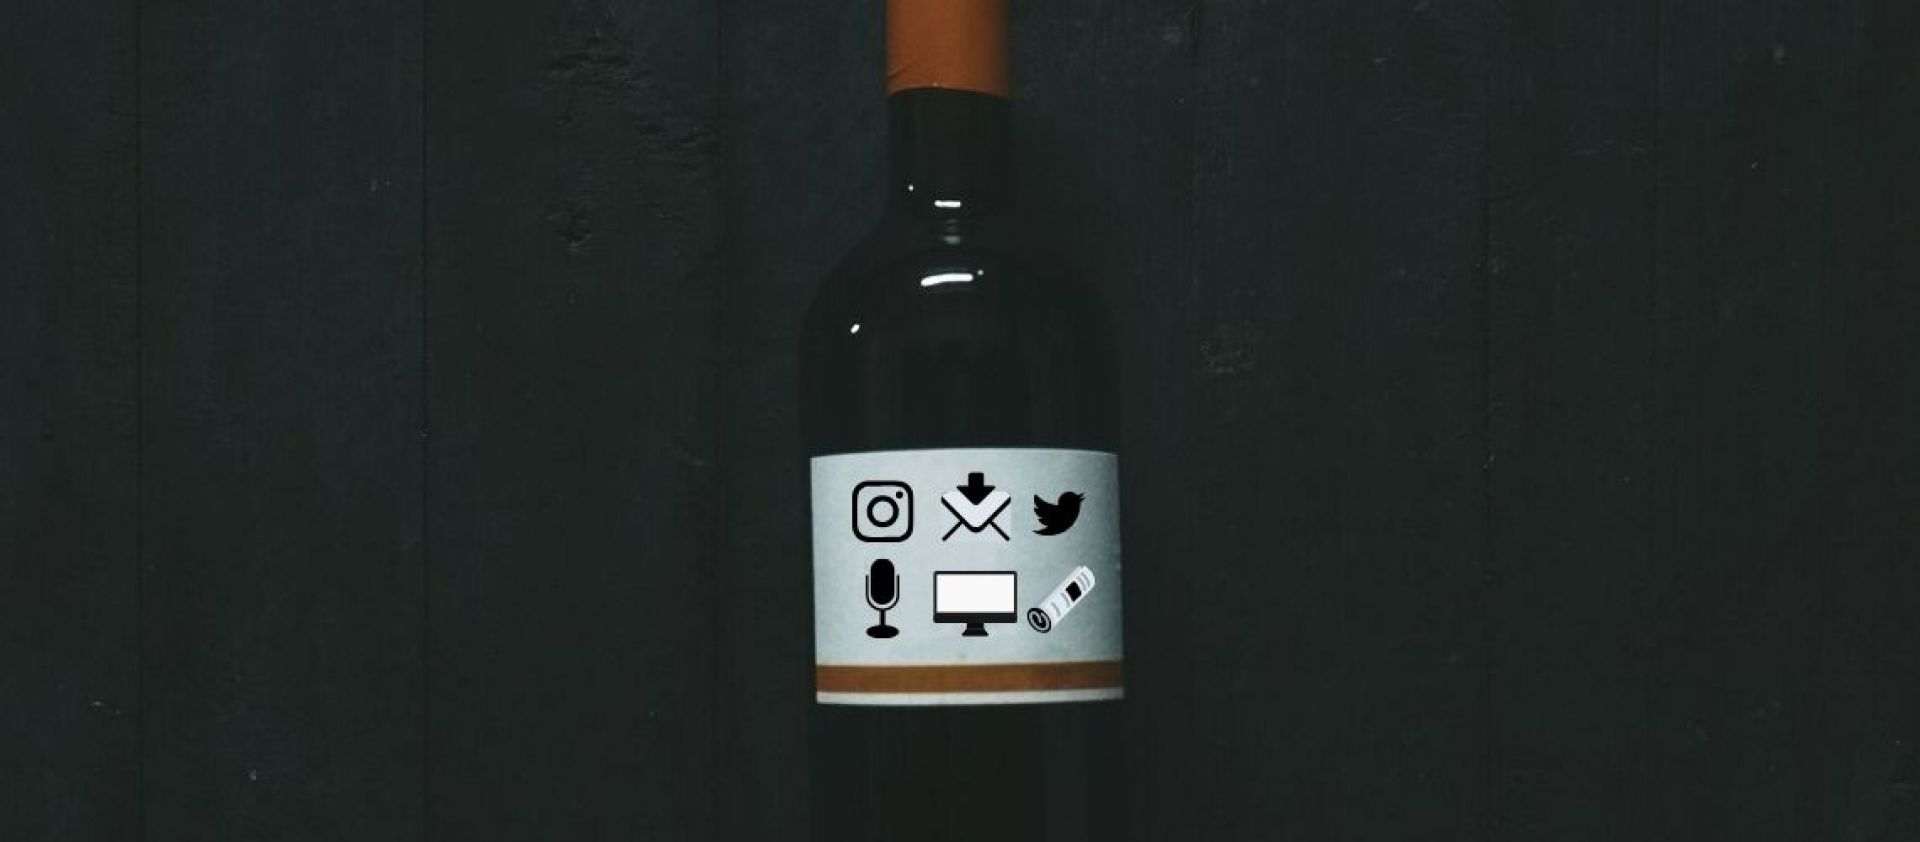 Photo for: How Wineries Can Leverage upon Media Assets